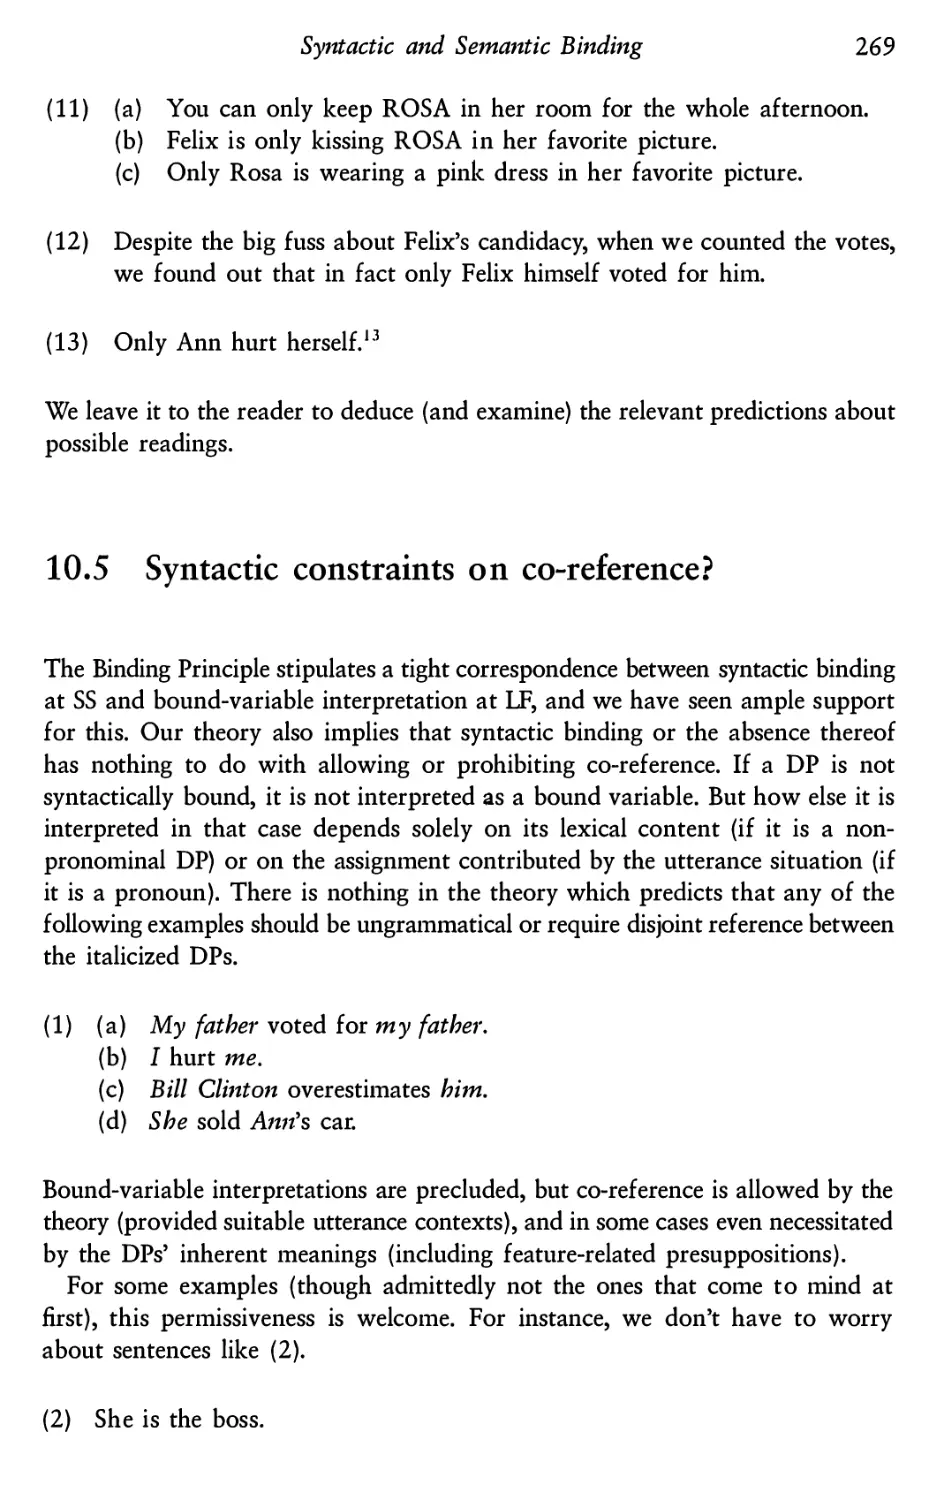 10.5 Syntactic constraints on co-reference?